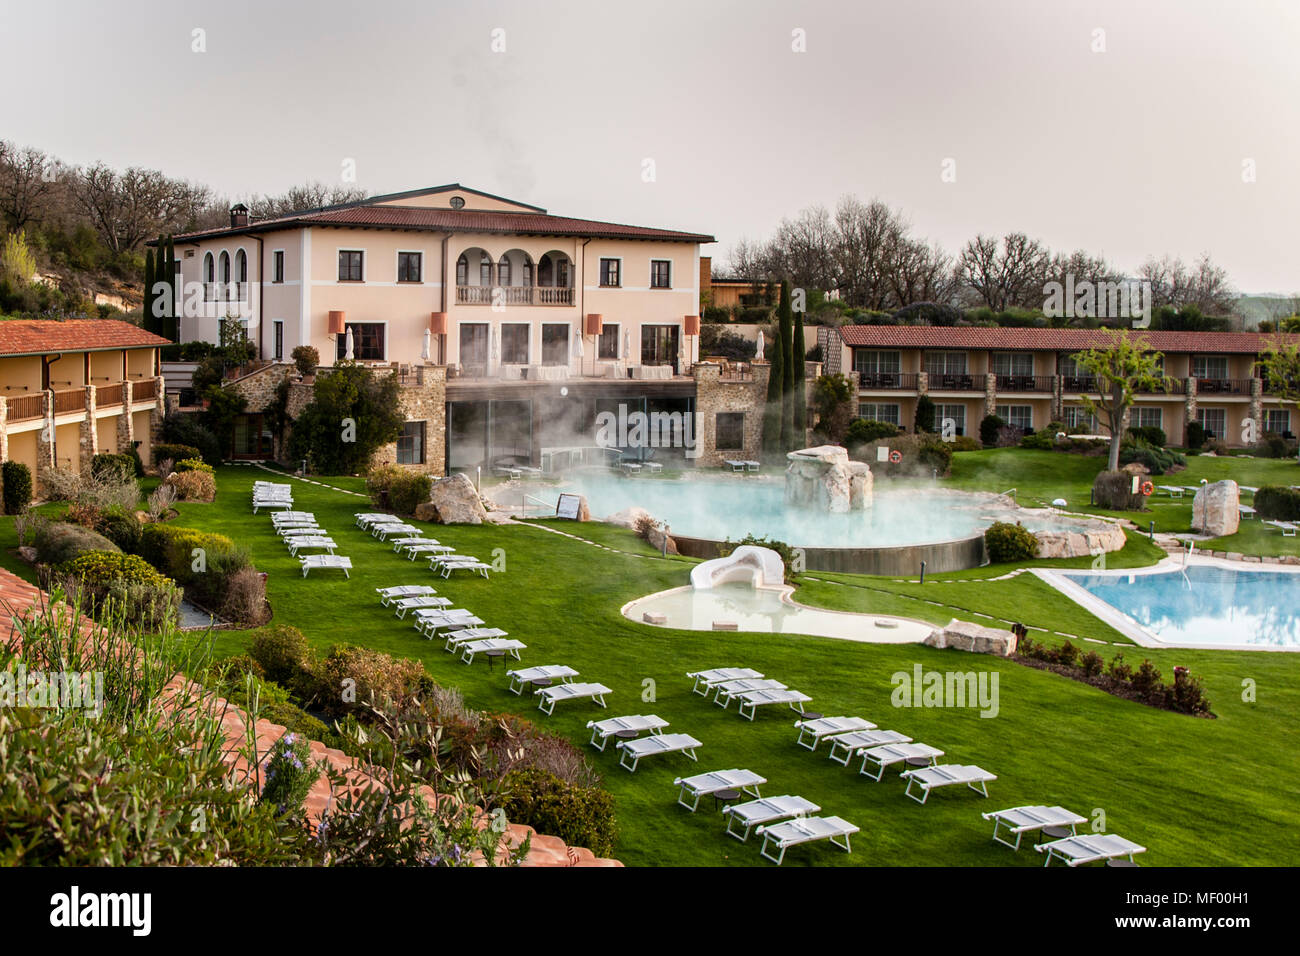 Hotel Adler Thermae, Bagno Vignoni, Tuscany with thermal pool, Tuscany, Val d'orcia Italy, UNESCO World Heritage. The main house in the style of a Roman villa. On both sides spread the 90 hotel rooms, all with private terrace or balcony and views of the countryside Stock Photo